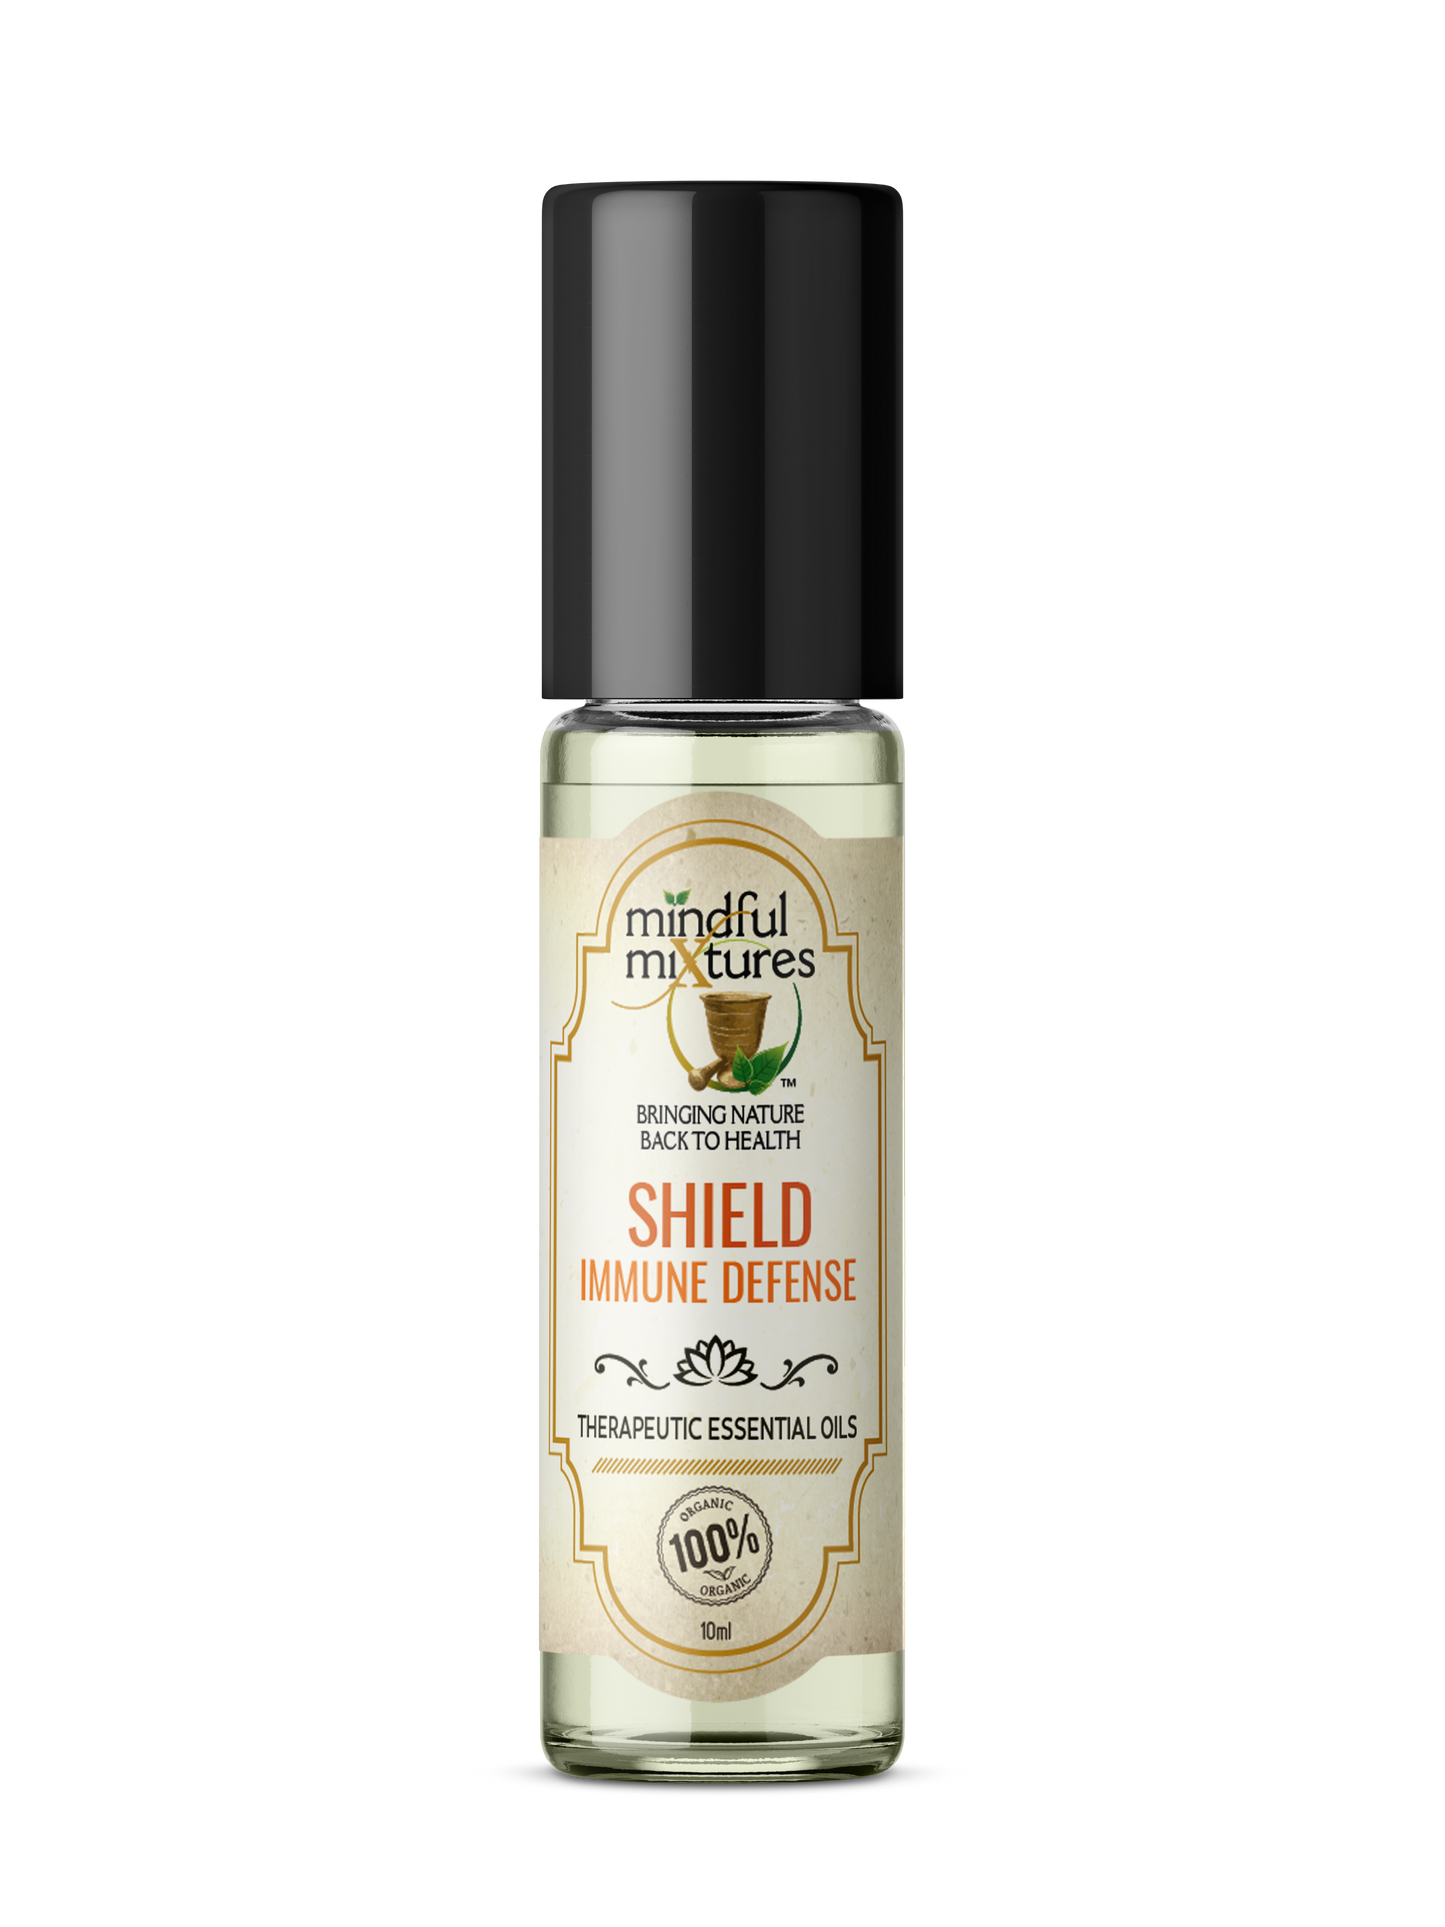 SHIELD: All-natural Cold & Flu Aromatherapy Defense Blend